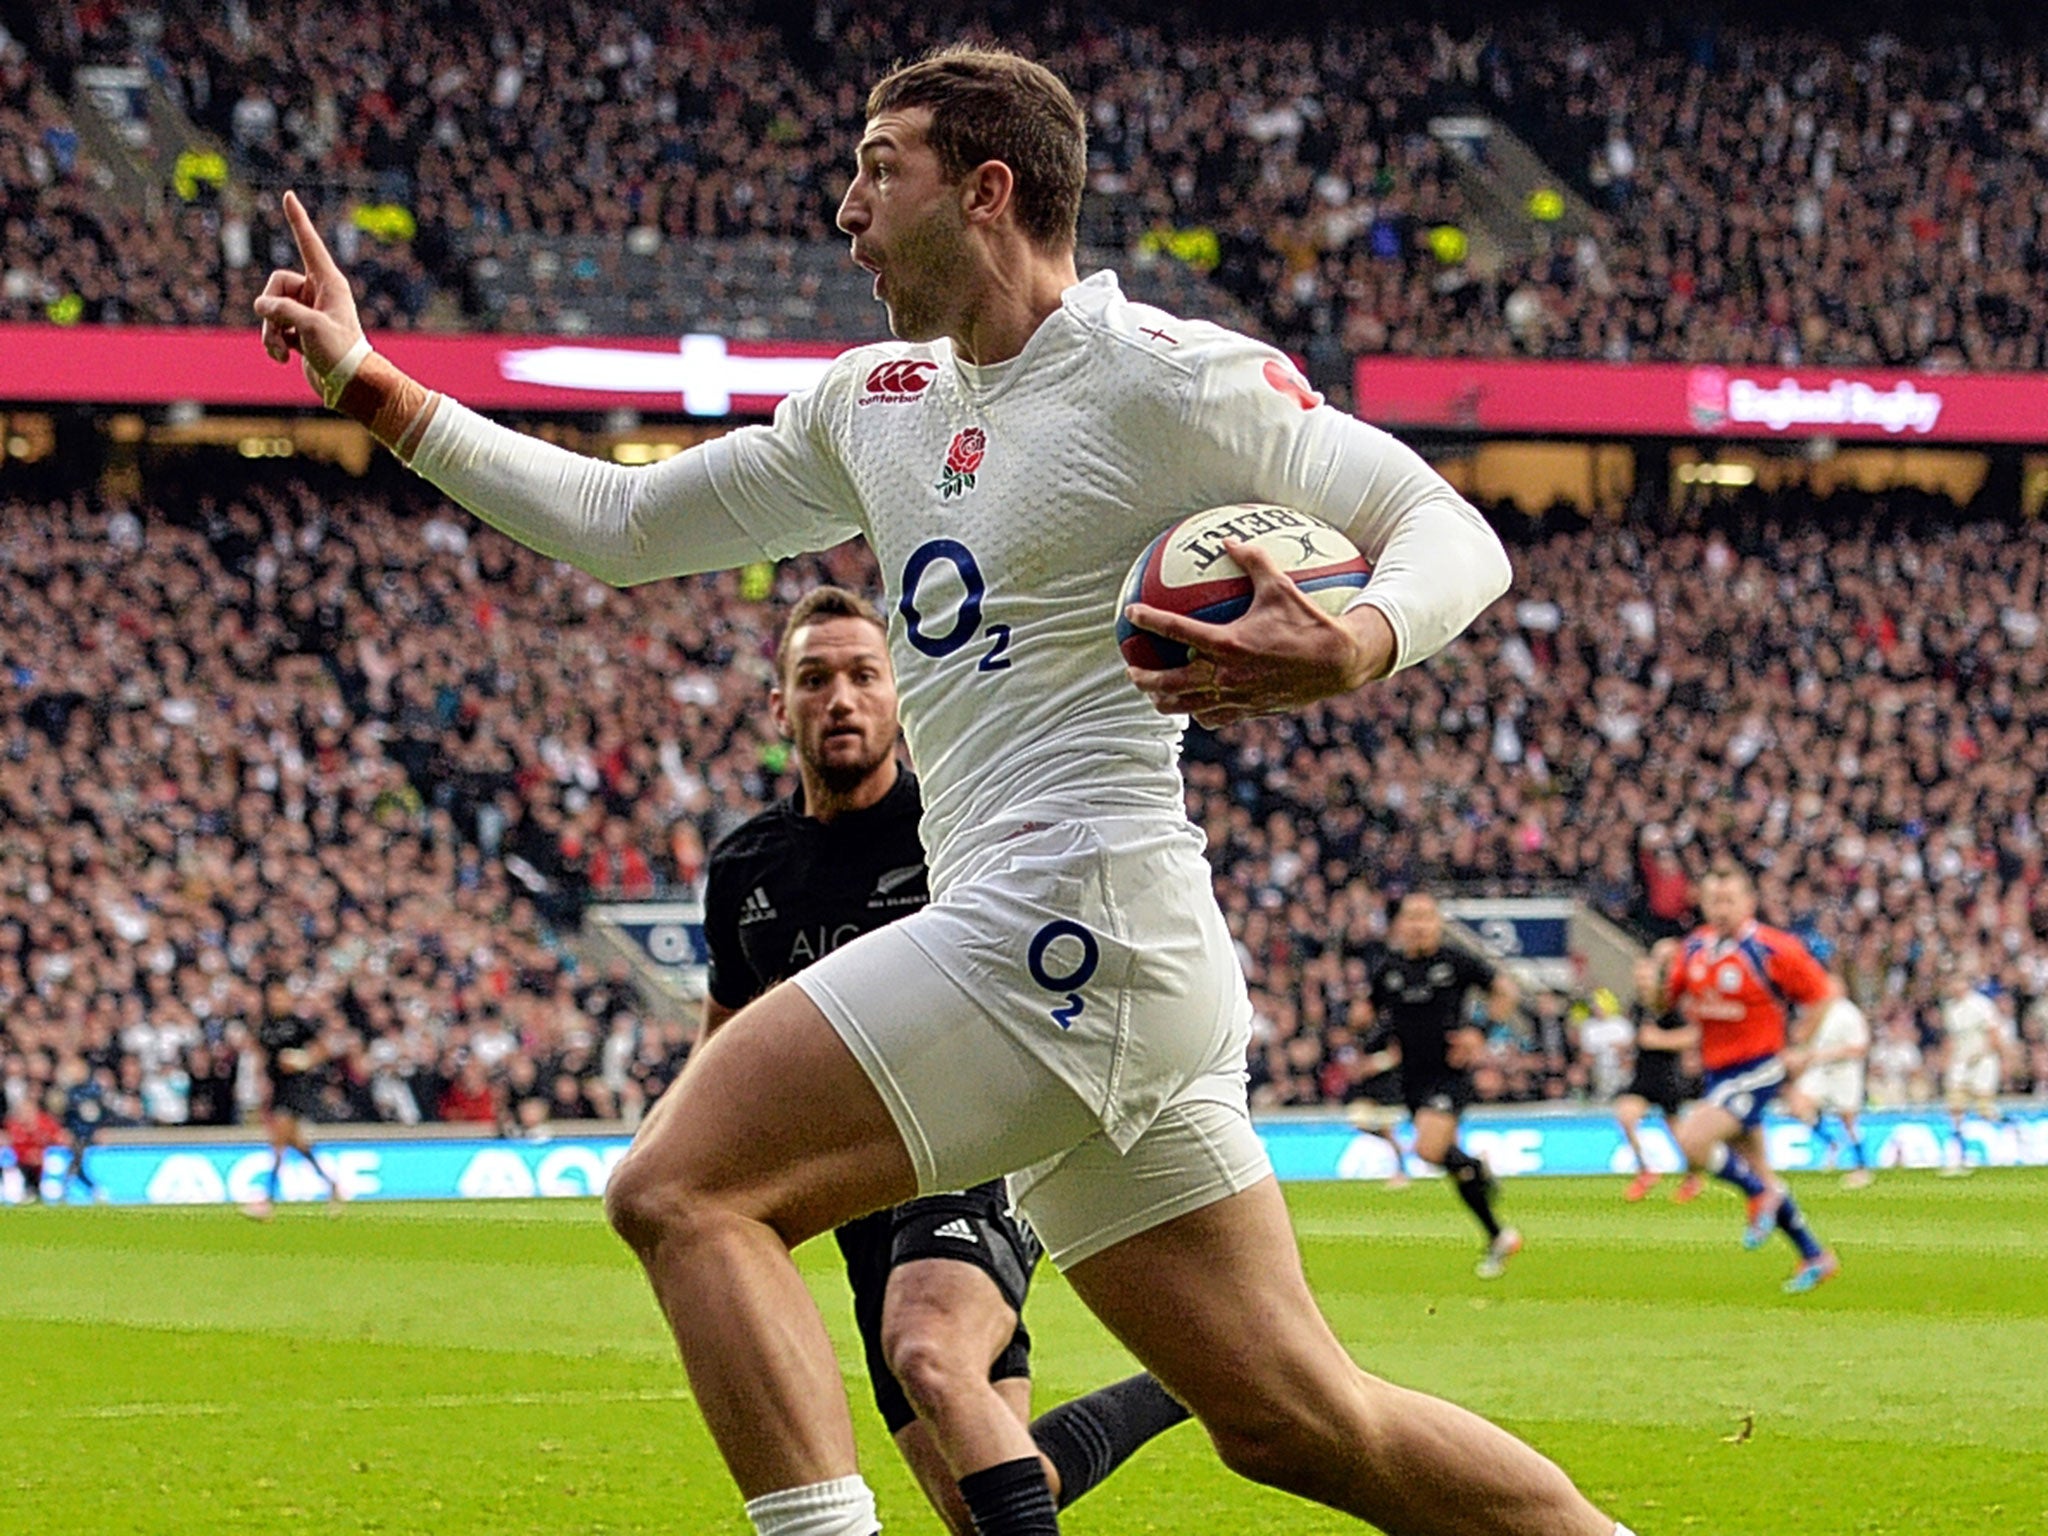 England wing Jonny May scores the opening try against New Zealand at Twickenham in November